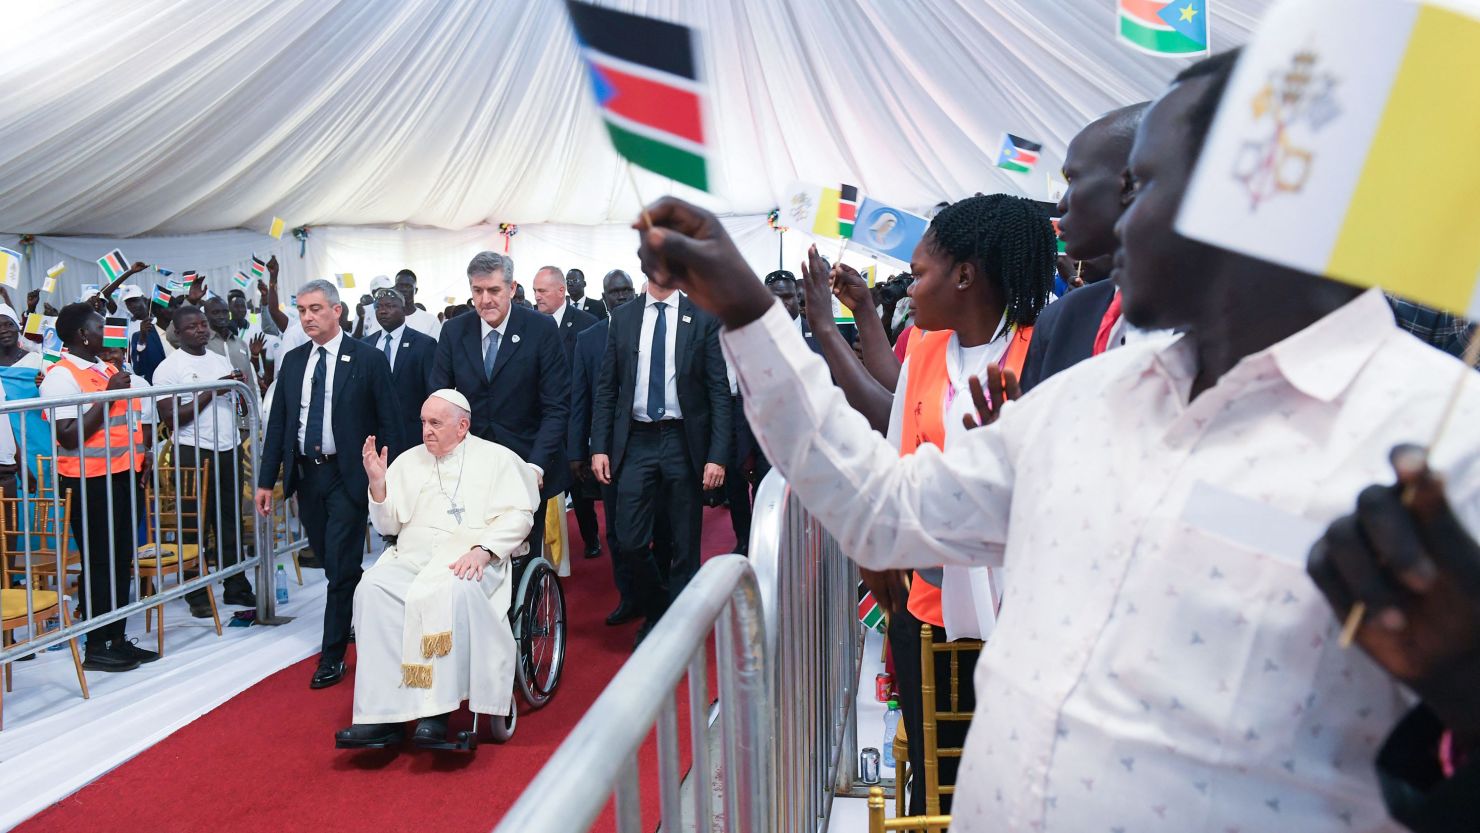 Attendees cheer as Pope Francis, seated on a wheelchair, arrives for a meeting with internally displaced persons at the Freedom Hall in Juba, South Sudan, on February 4, 2023.